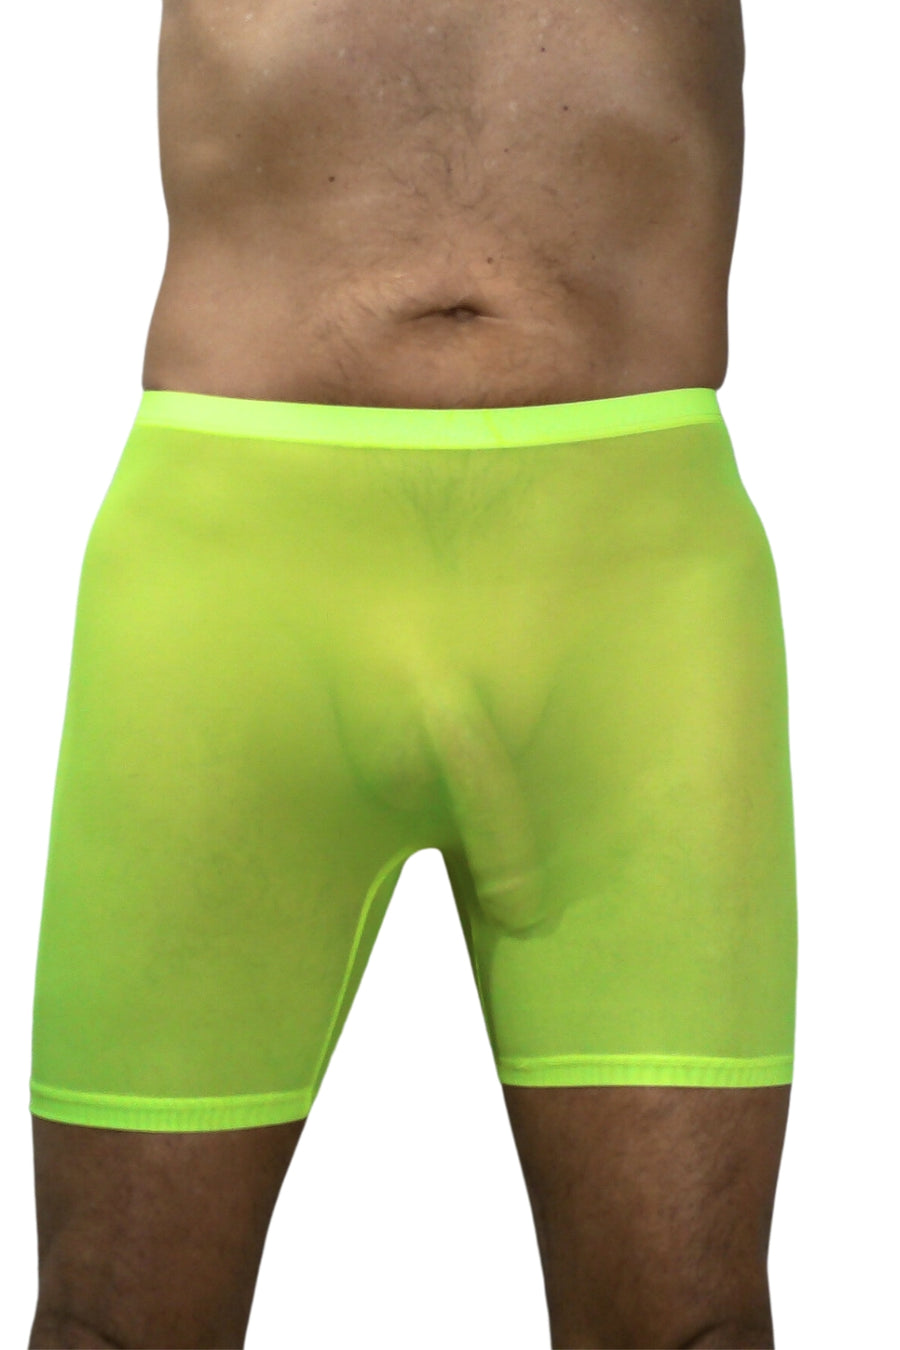 Bodywear for Men Ultra Sheer High Waist Boxer Shorts #BfM-1042 made from a fine poly blend sheer material. Our Sheer Boxer shorts sit high on your waist, 4' long legs, seamless front with a center seamed rear in Neon Green